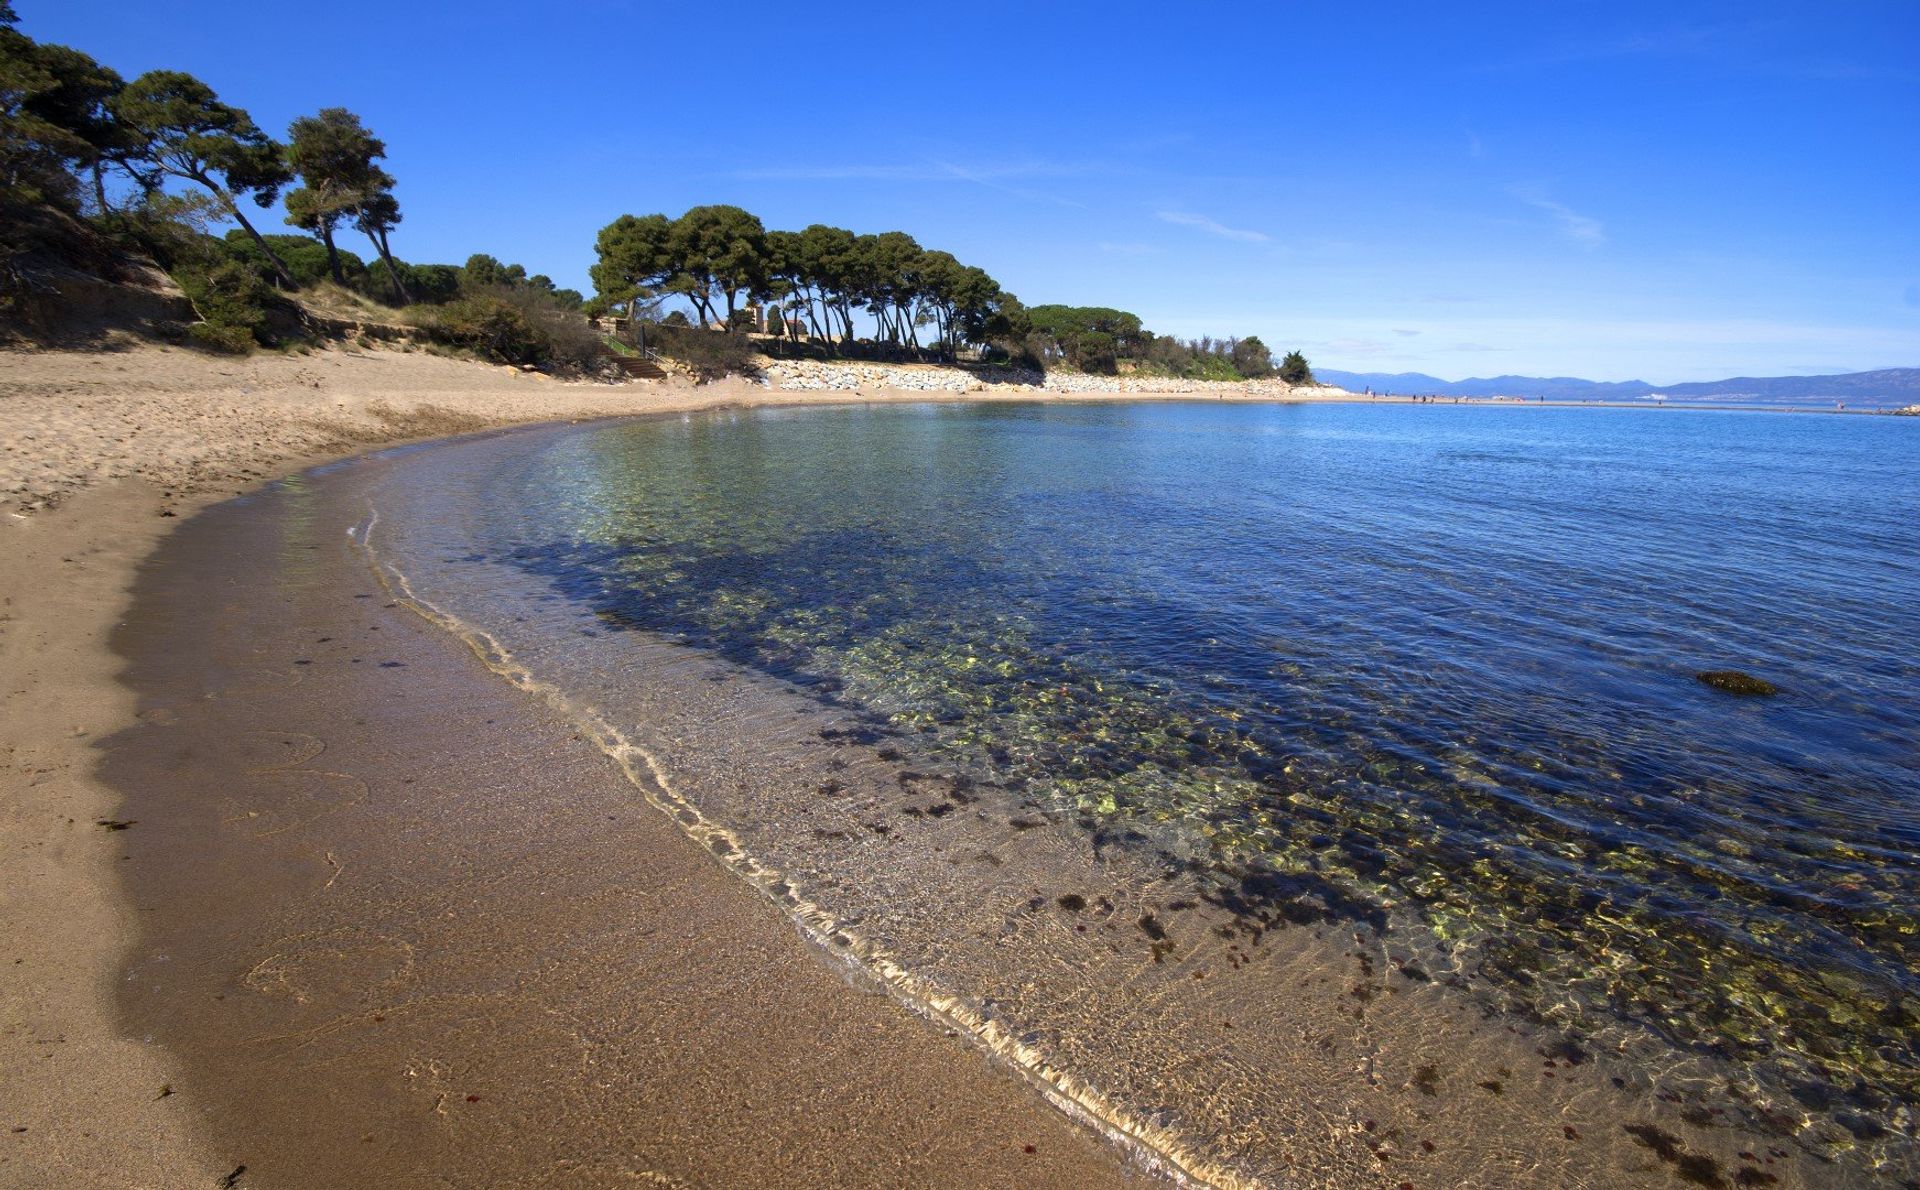 Pedrigolet beach offers a perfect spot for the ultimate retreat away from the main crowds of the Costa Brava